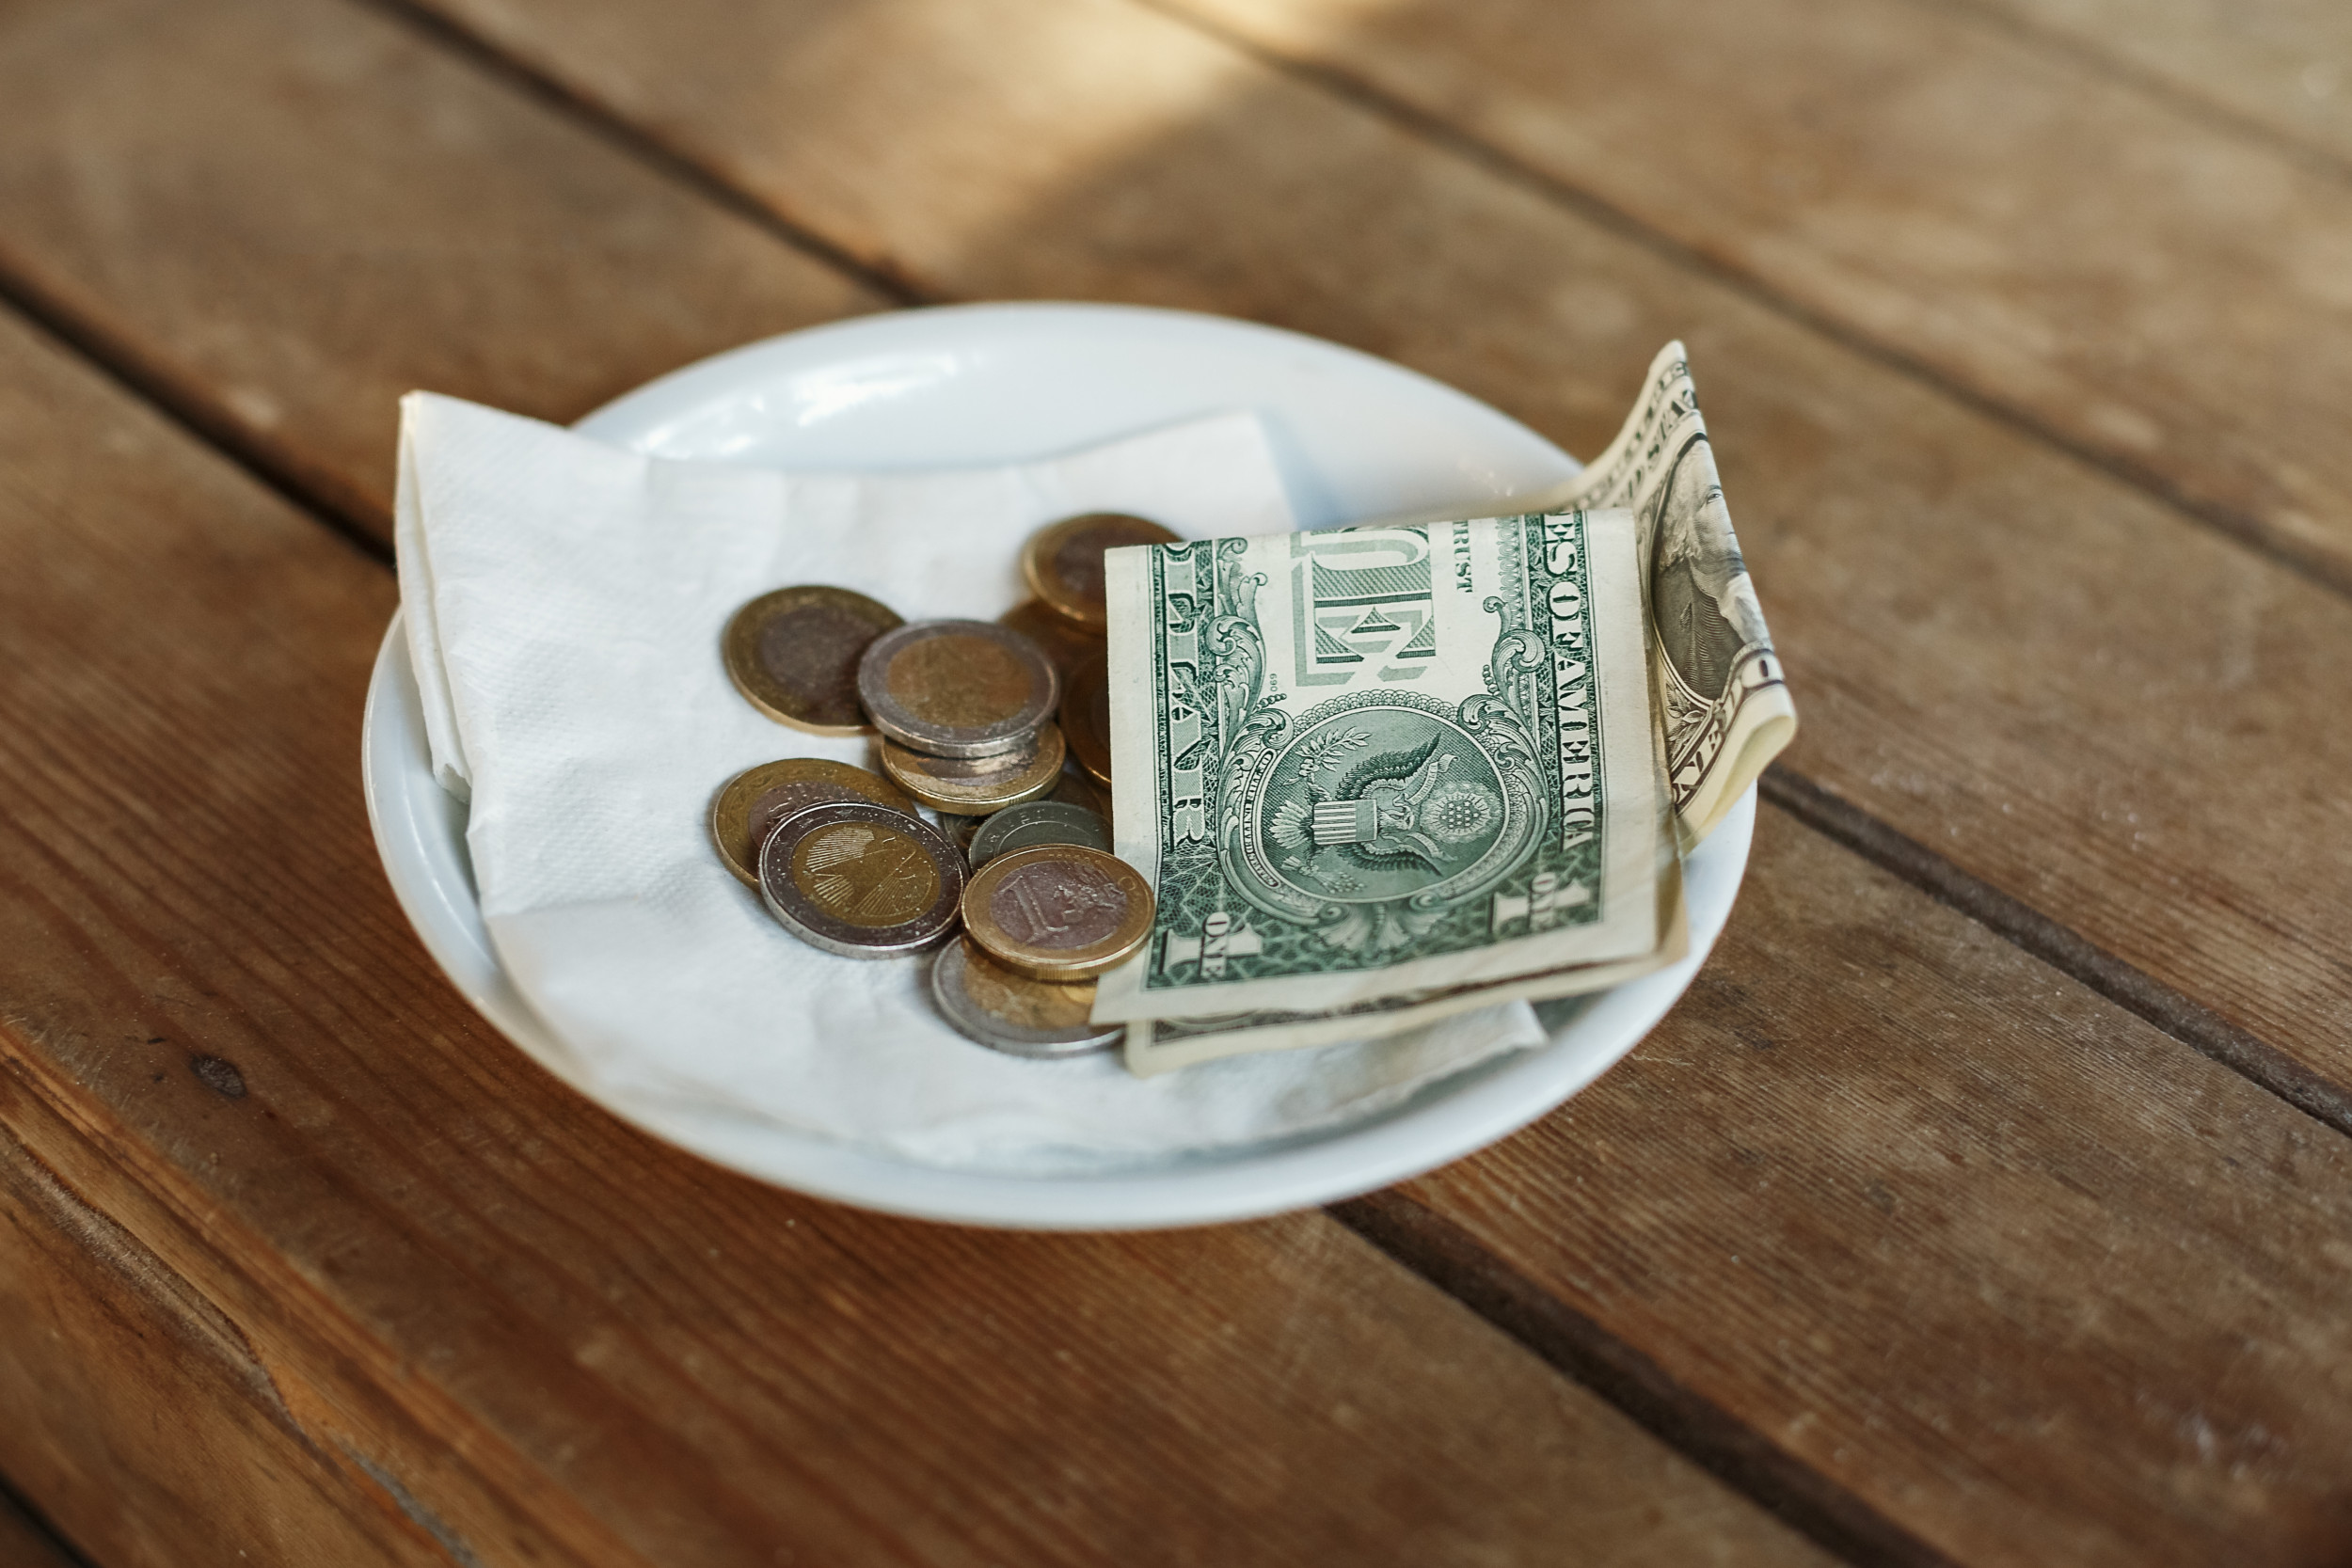 i-m-going-to-pass-out-waitress-in-shock-after-couple-left-massive-tip